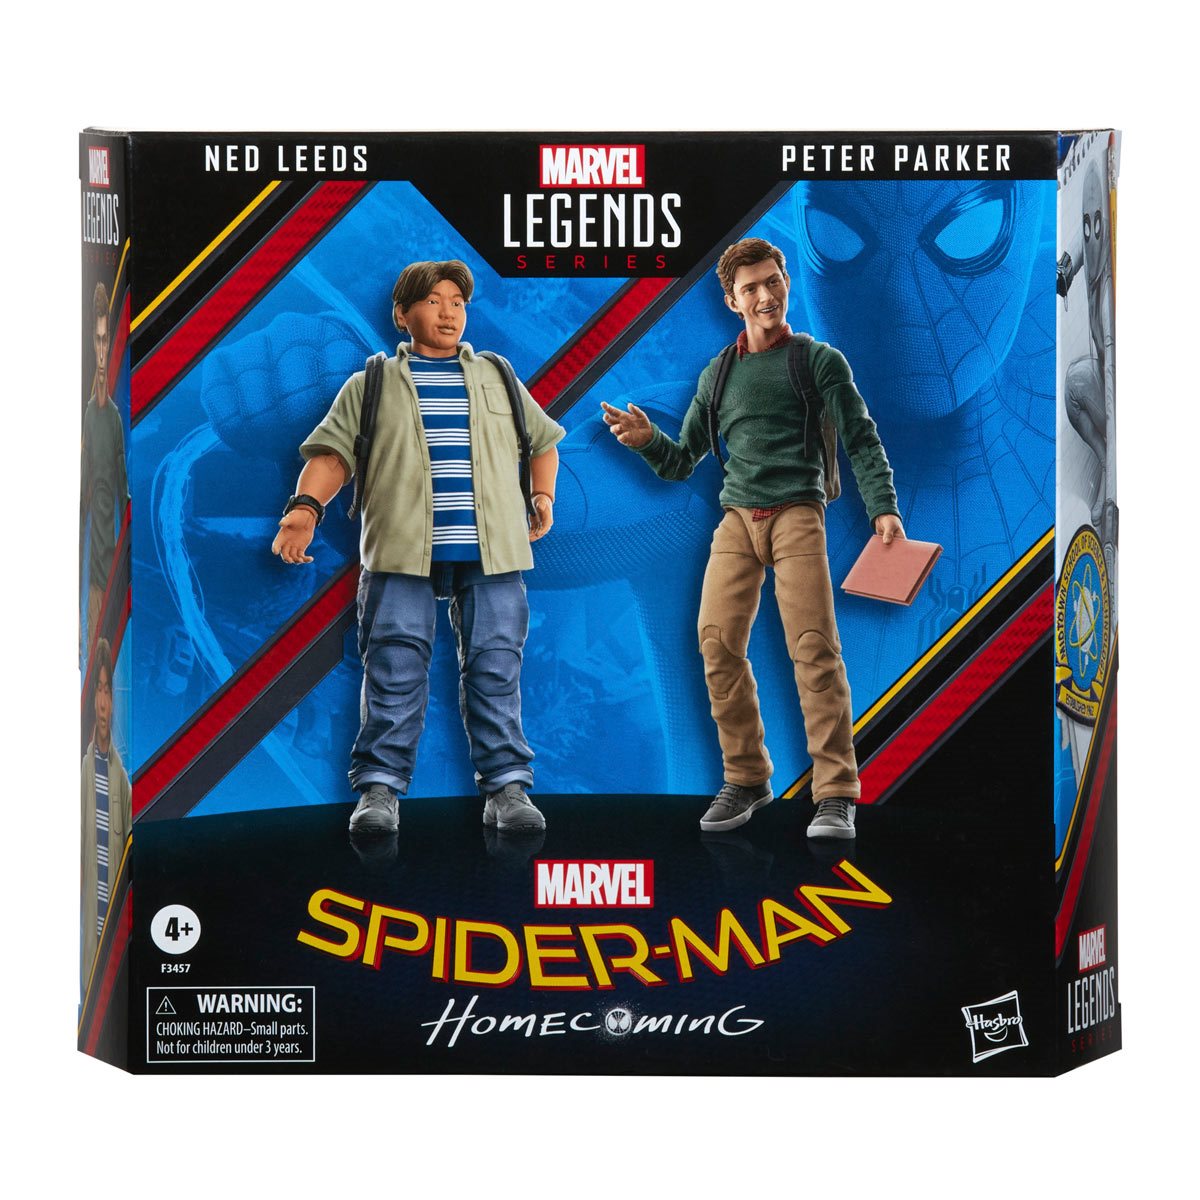 Ned Leeds and Peter Parker Set - Spider-Man Homecoming Hasbro Legends